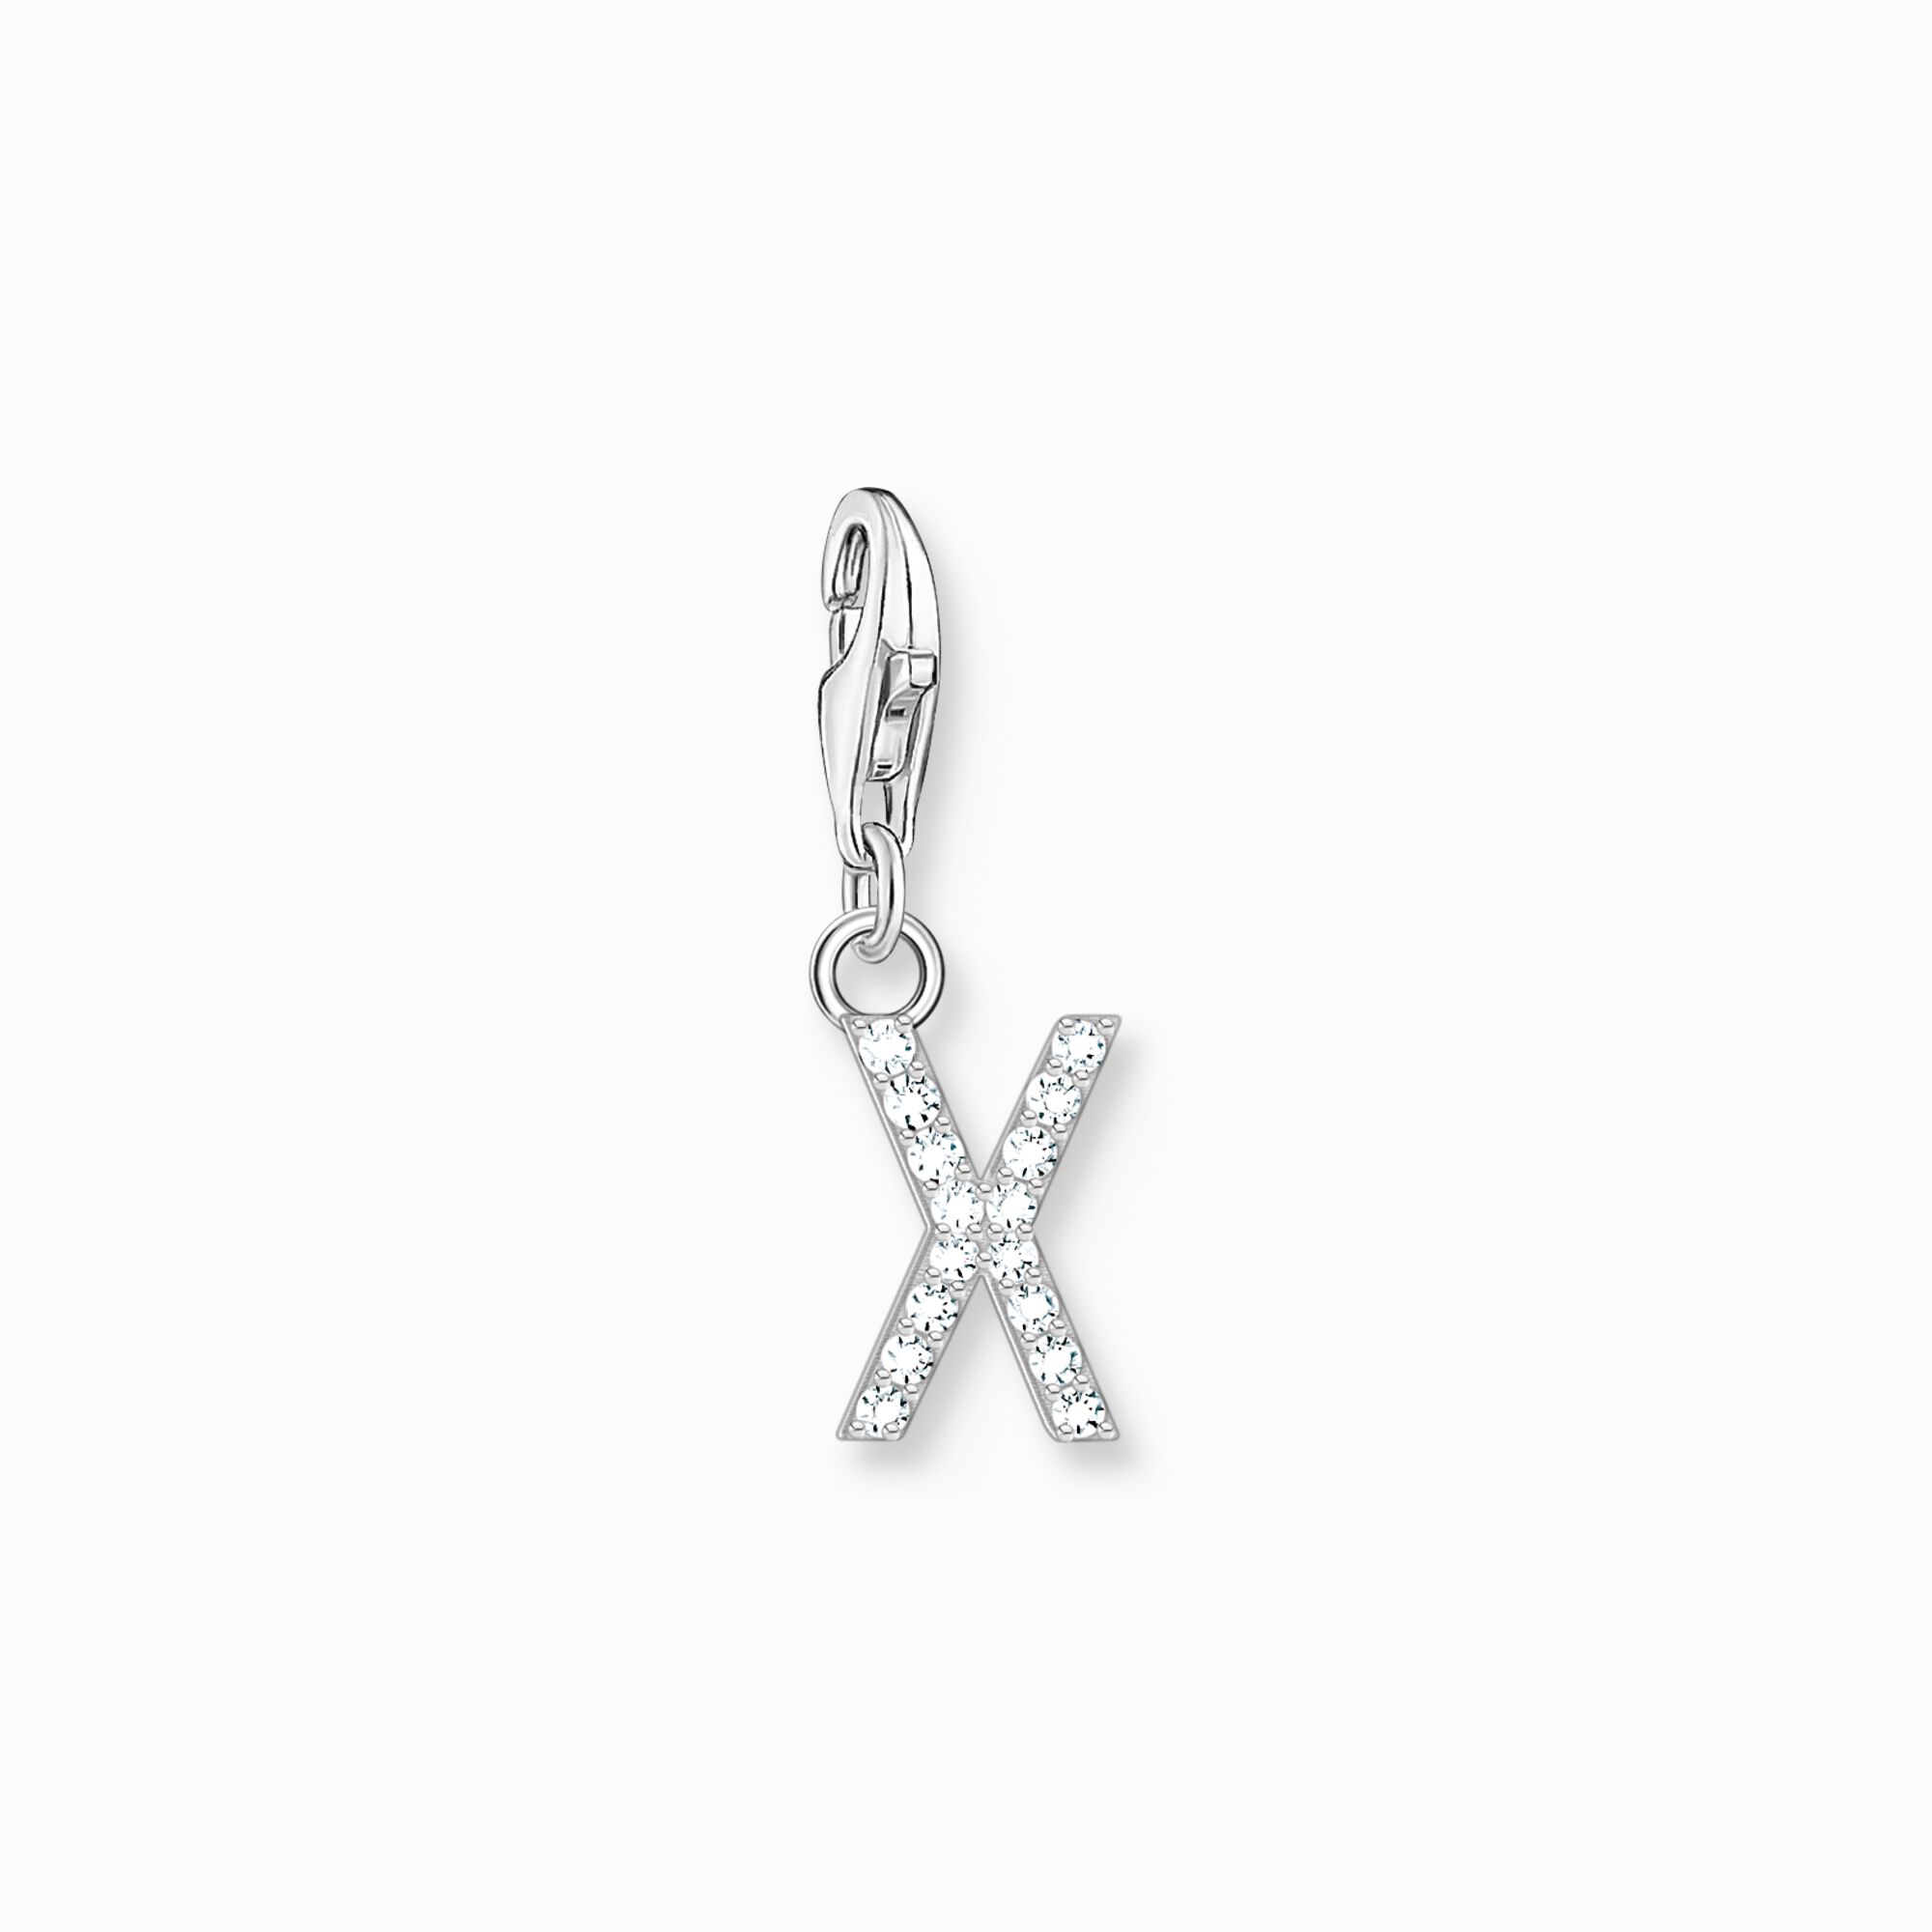 Charm pendant letter X with white stones silver from the Charm Club collection in the THOMAS SABO online store